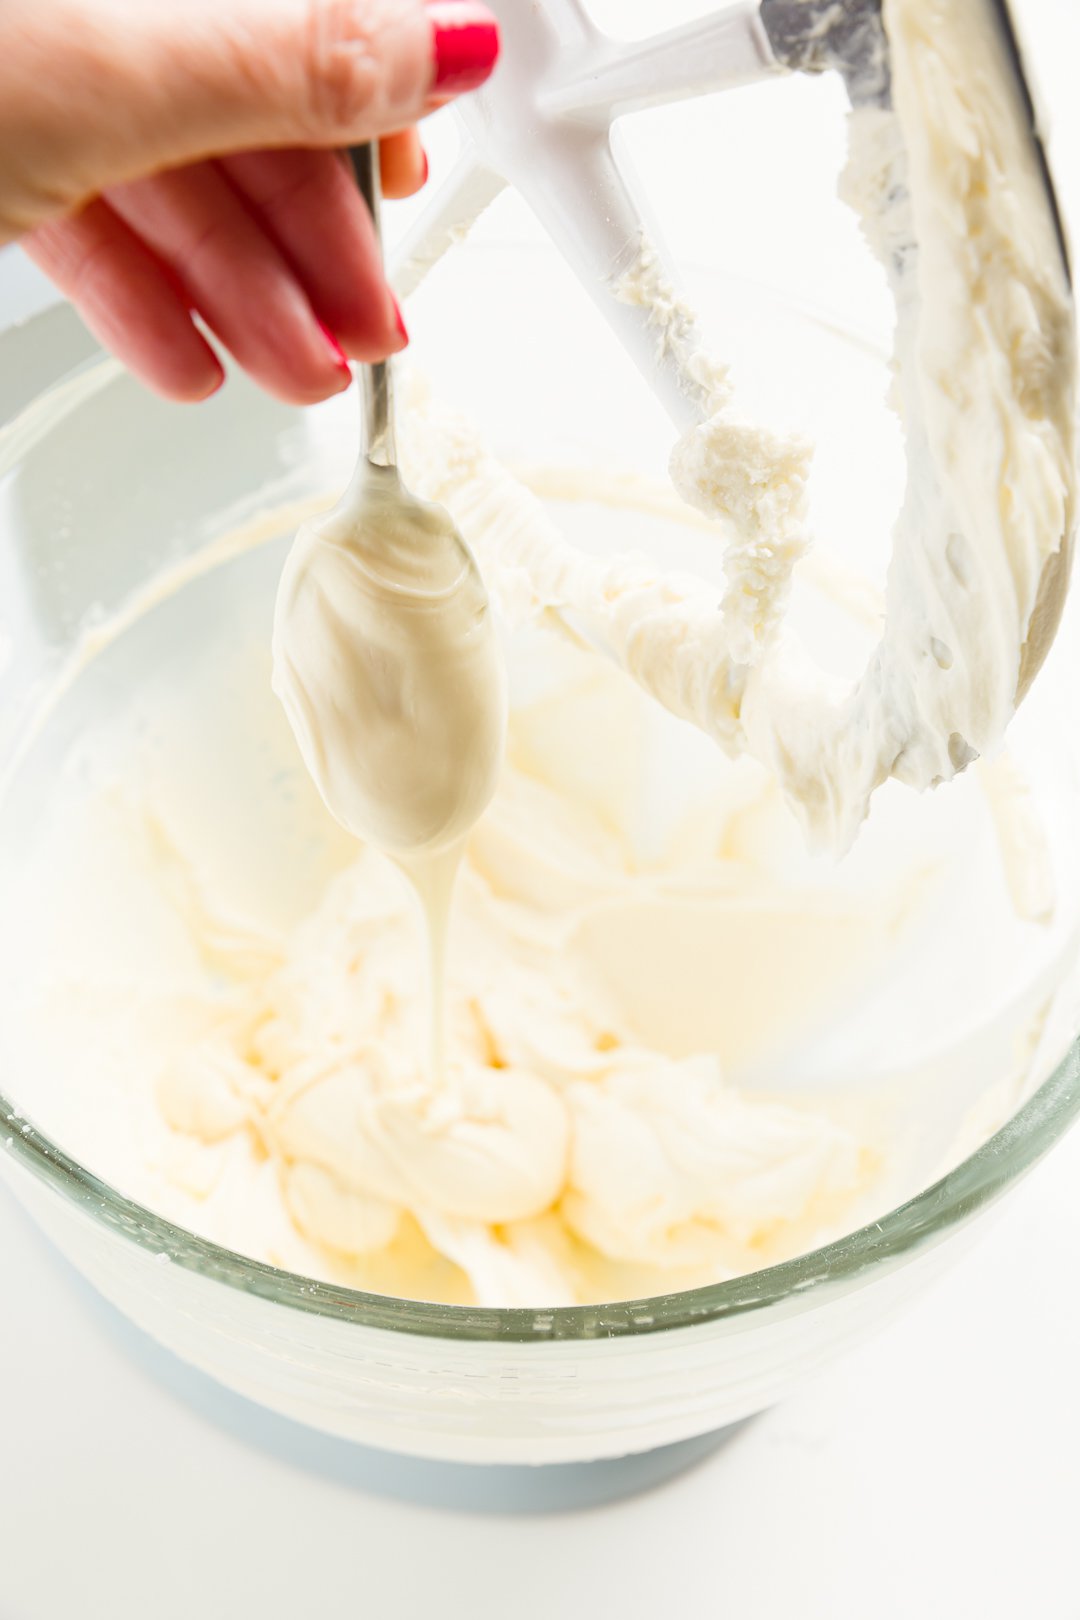 Adding white chocolate to frosting